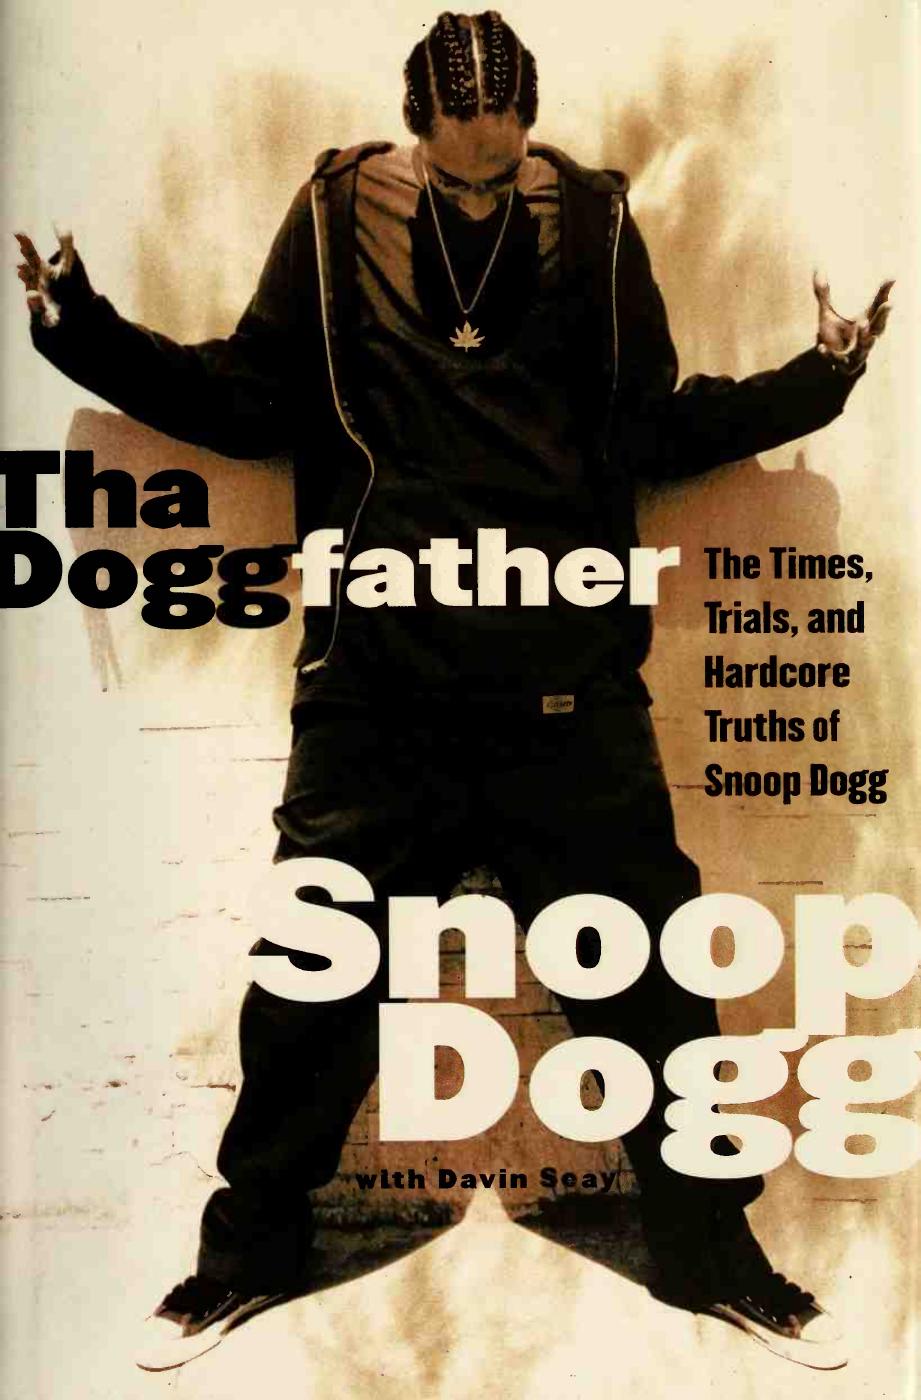 Tha Doggfather : The Times, Trials, and Hardcore Truths of Snoop Dogg by Snoop Doggy Dogg (Musician)